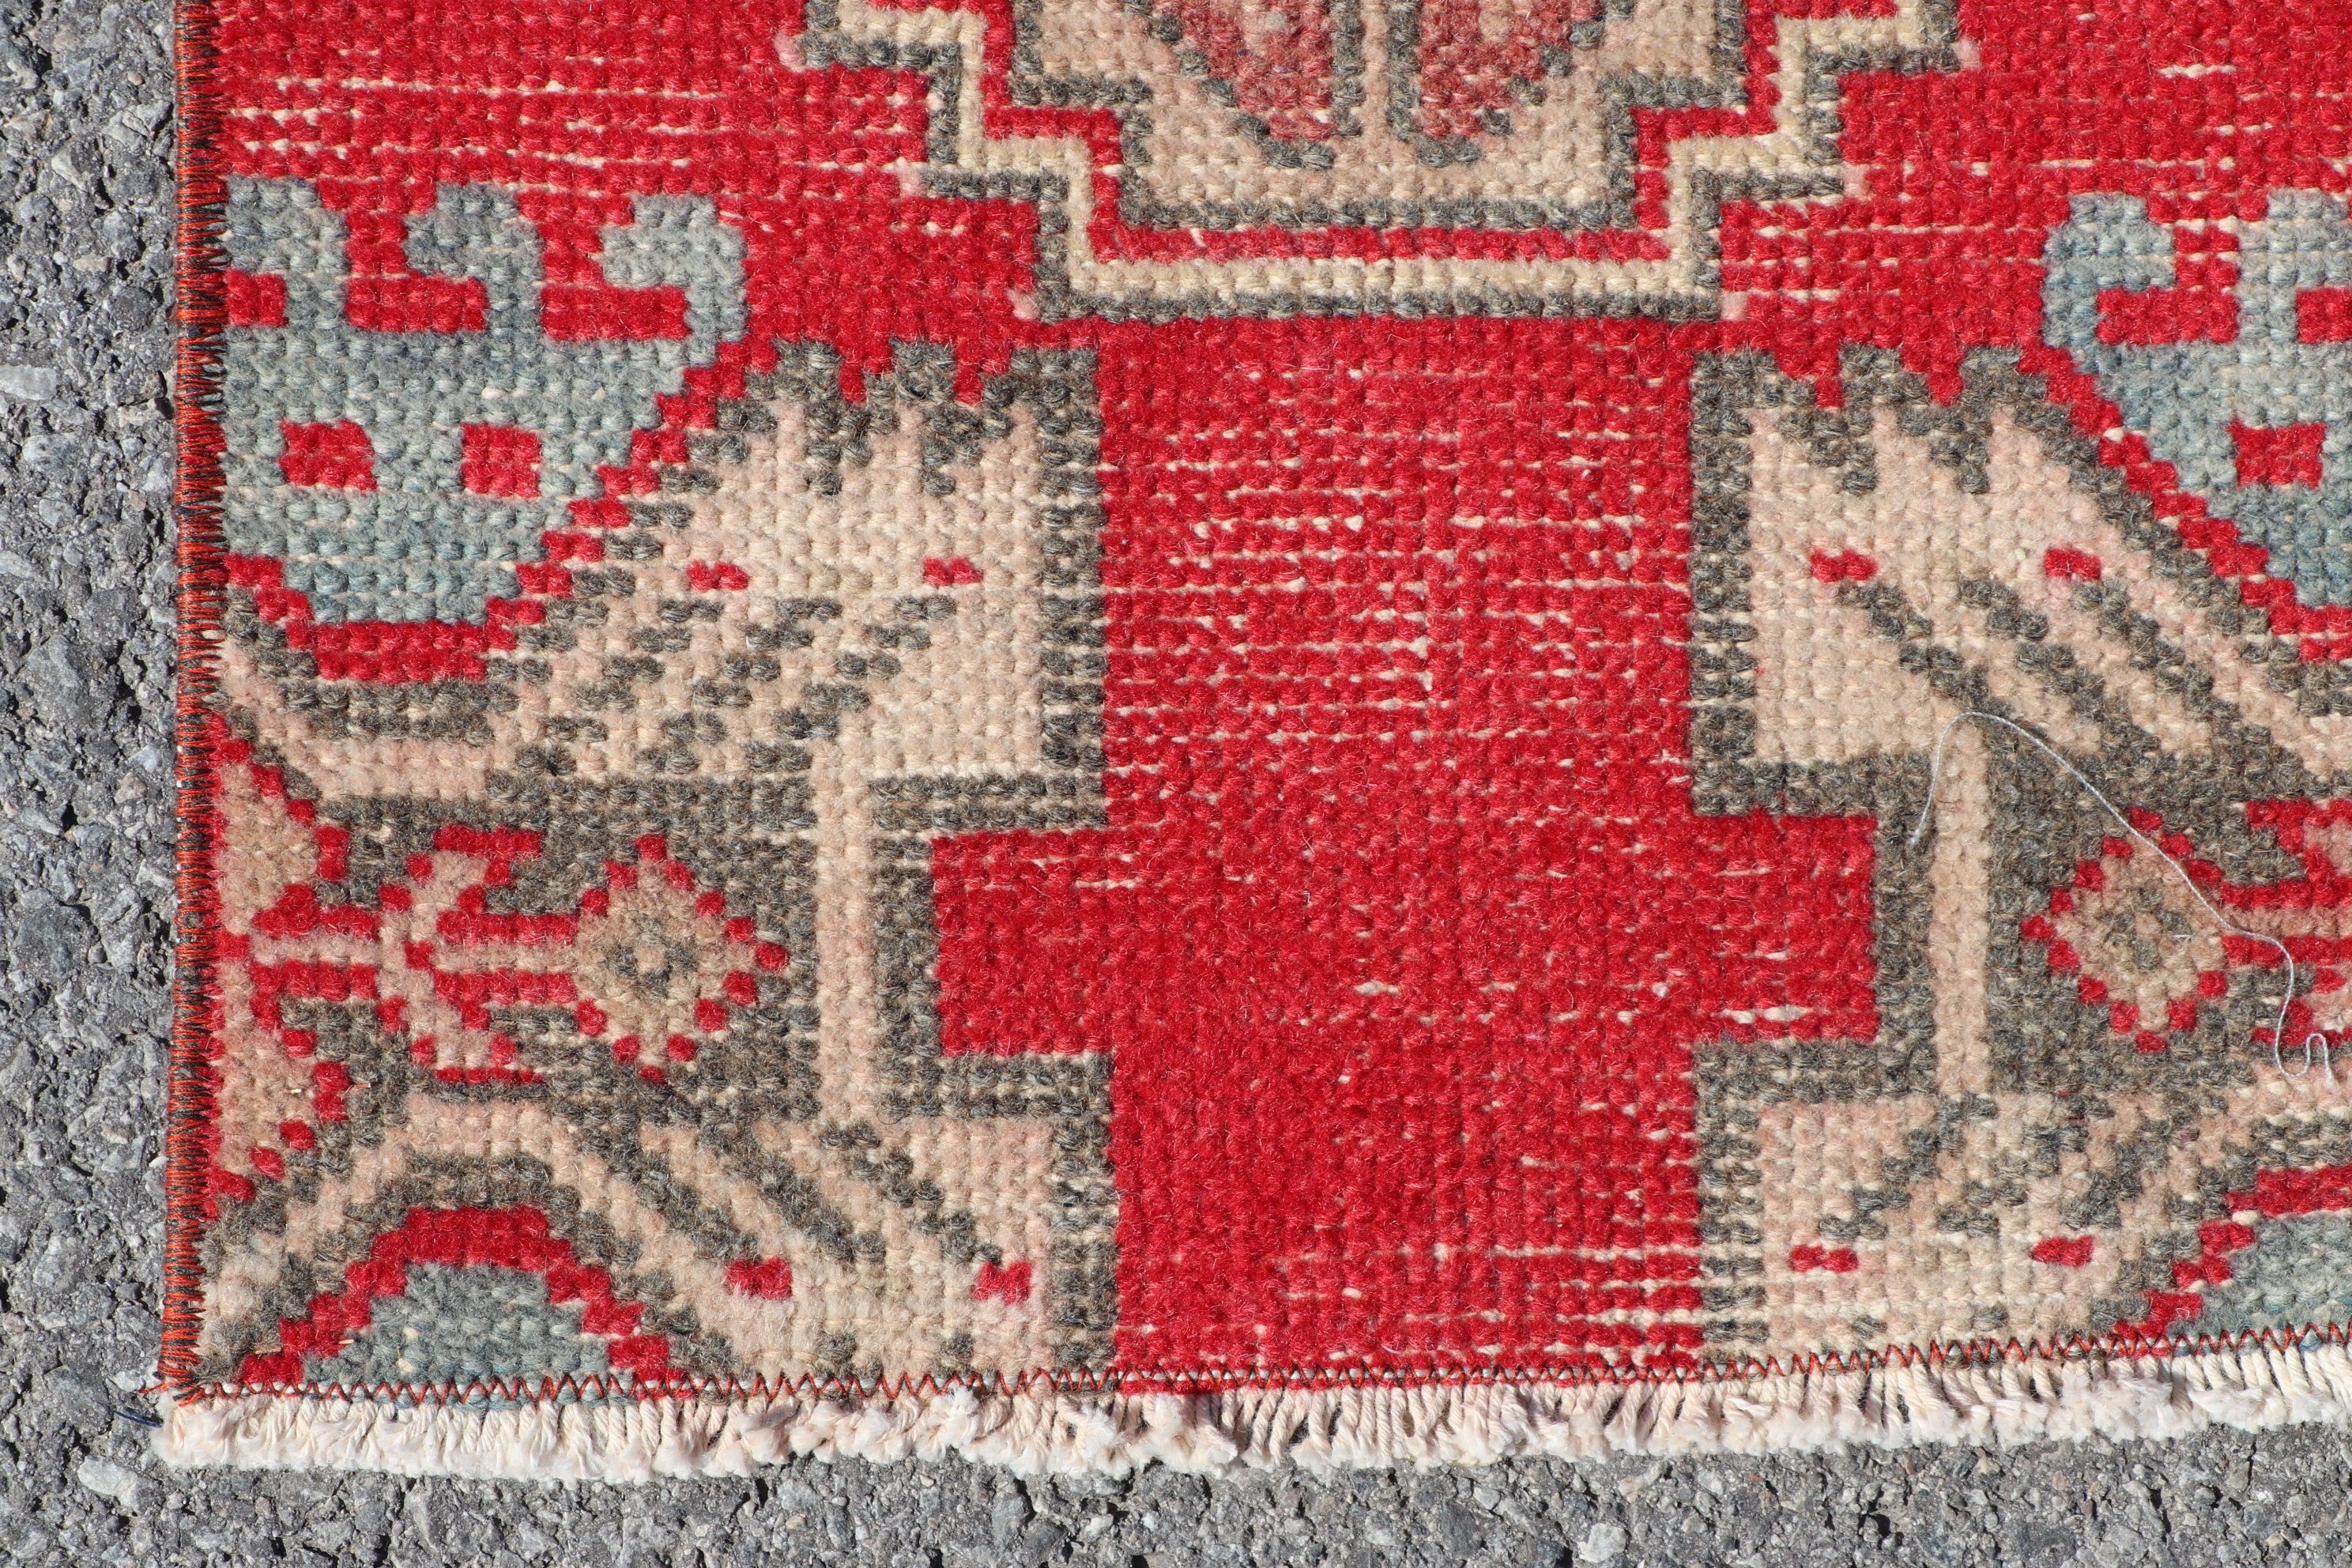 Antique Rug, Vintage Rug, Turkish Rugs, 1.3x2.7 ft Small Rugs, Bath Rug, Cool Rugs, Rugs for Bathroom, Entry Rug, Red Moroccan Rug